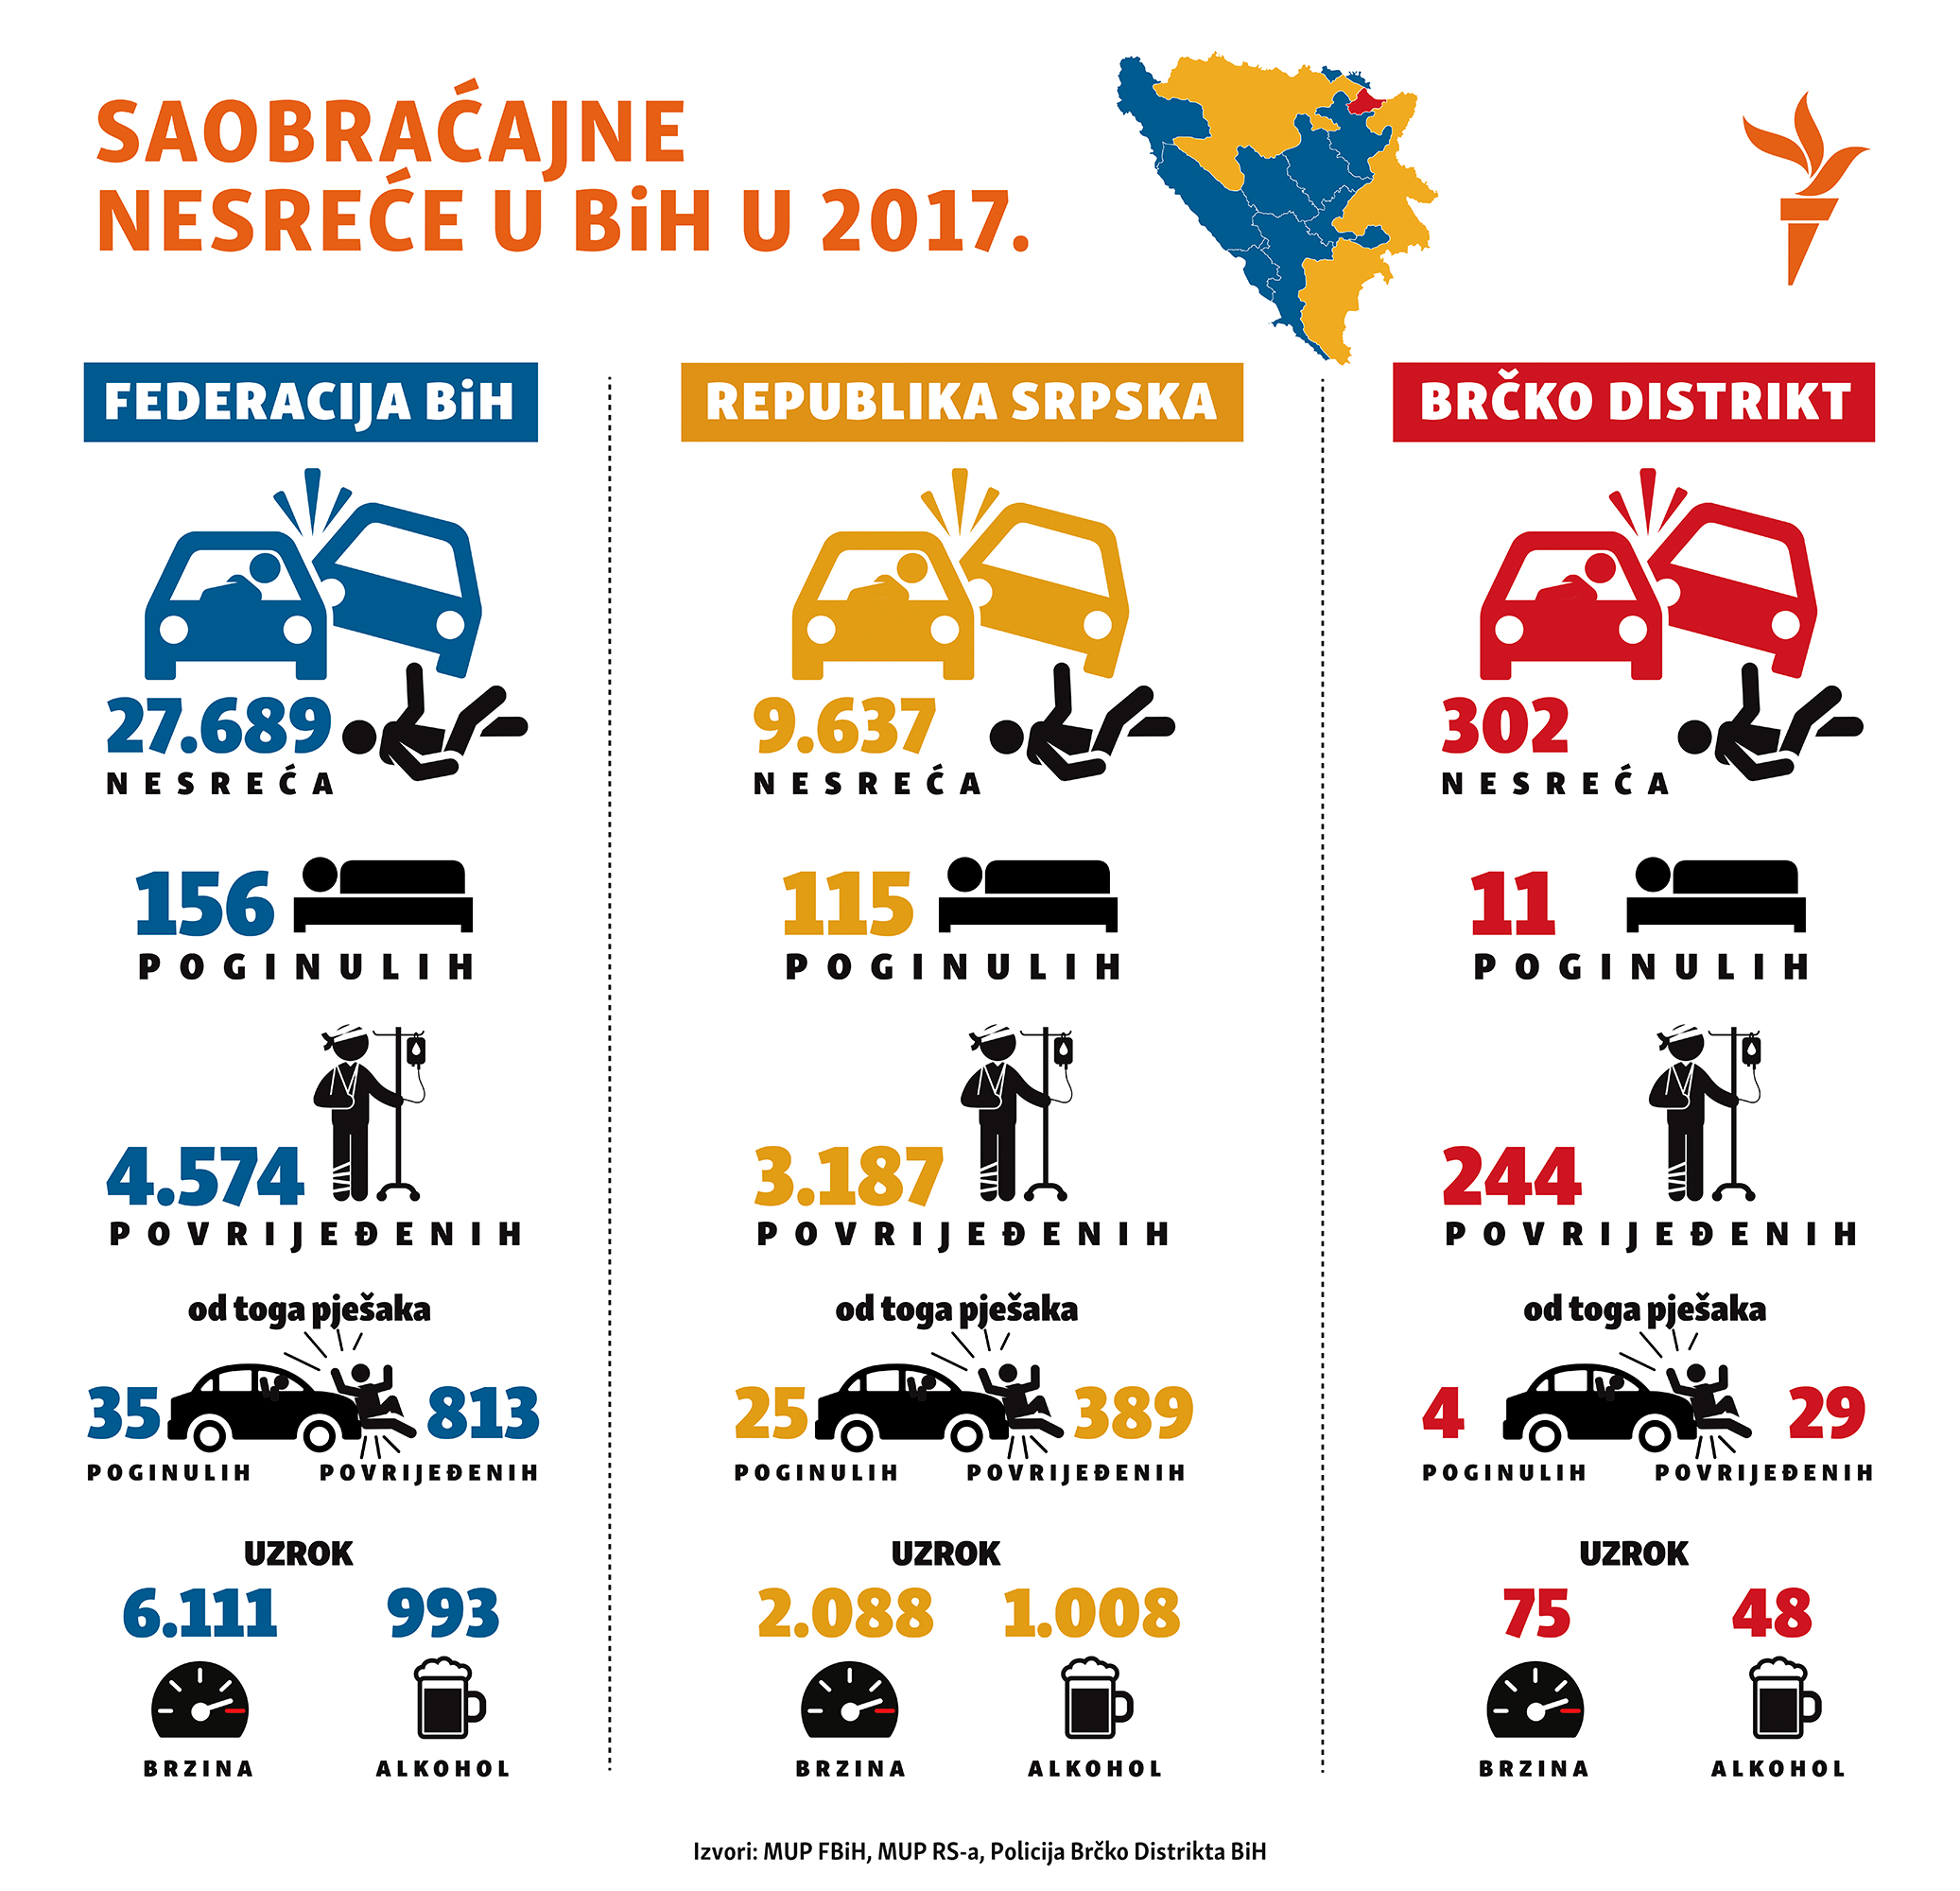 car accidents in Bosnia and Herzegovina during 2017